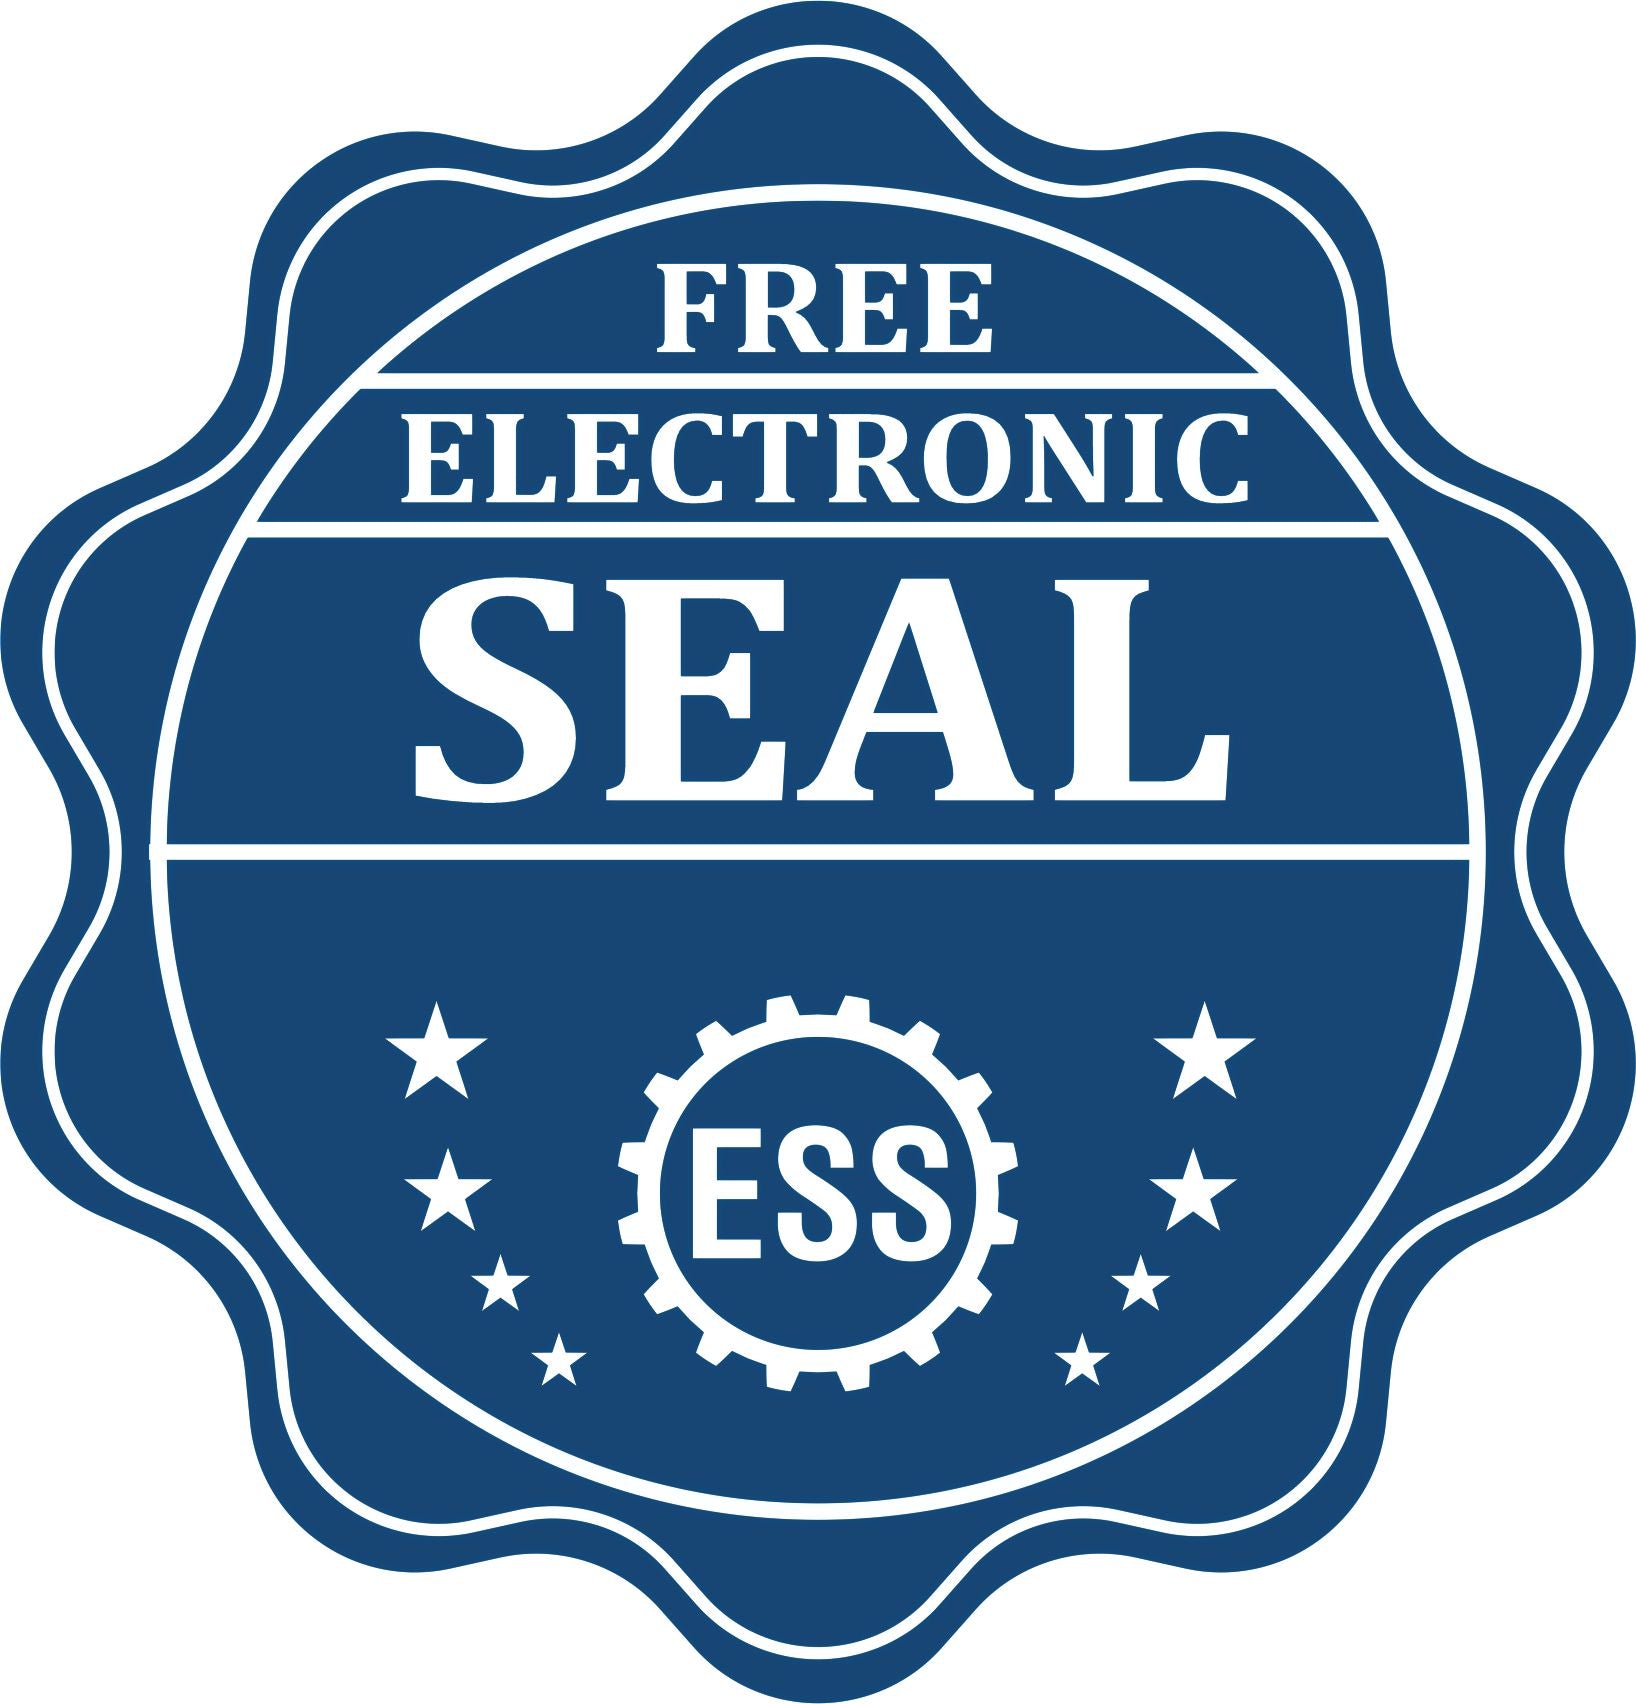 A badge showing a free electronic seal for the MaxLight Premium Pre-Inked Oregon Rectangular Notarial Stamp with stars and the ESS gear on the emblem.